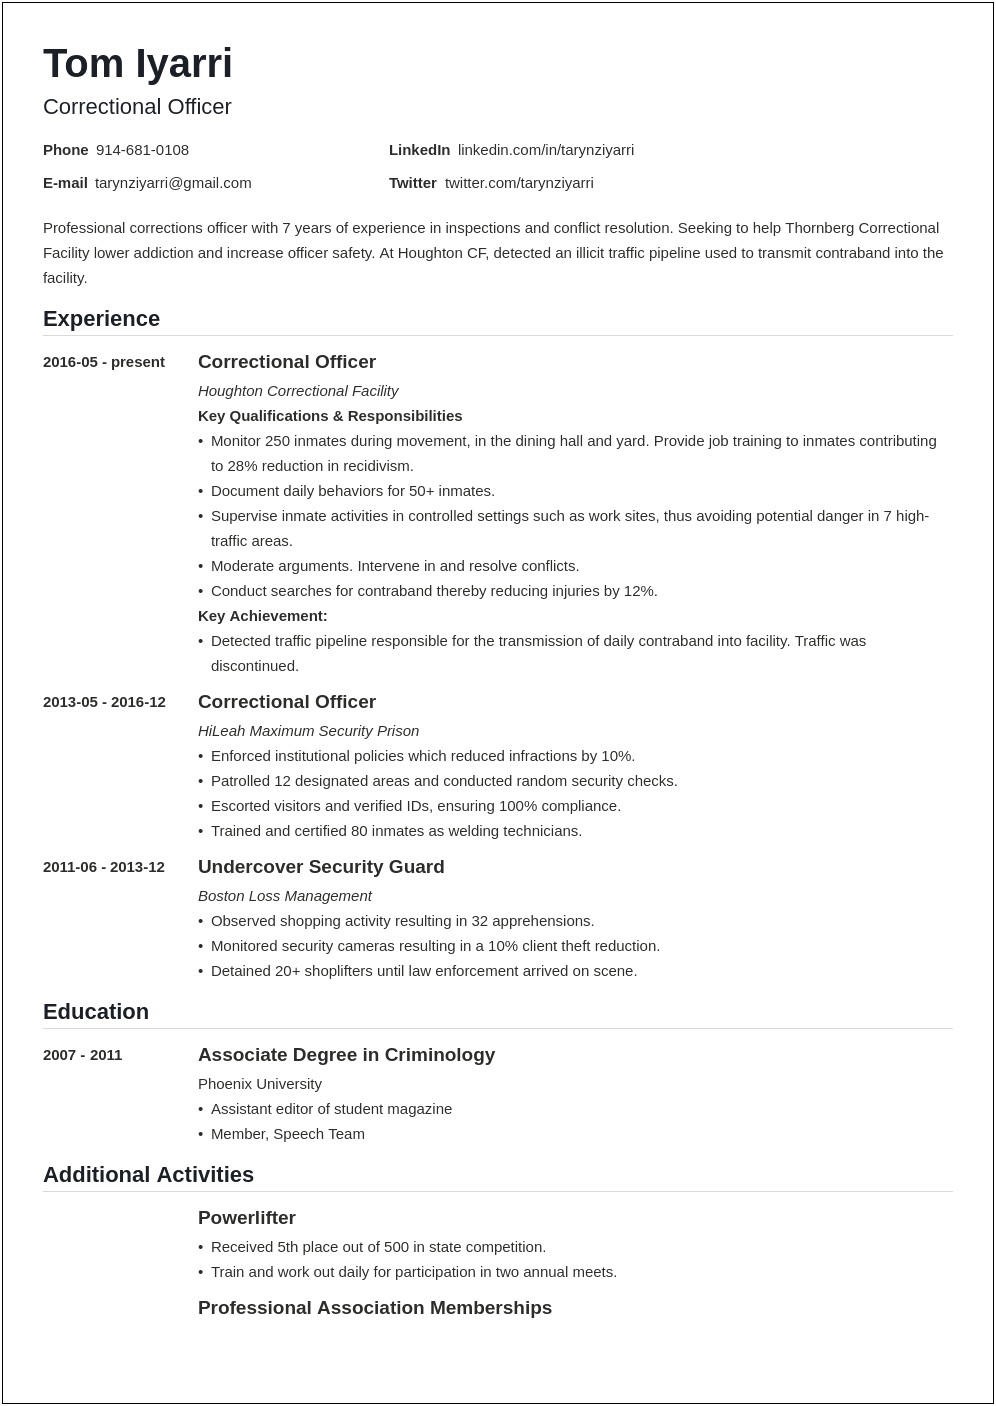 Summary Of Qualifications On Resume Correctional Officer